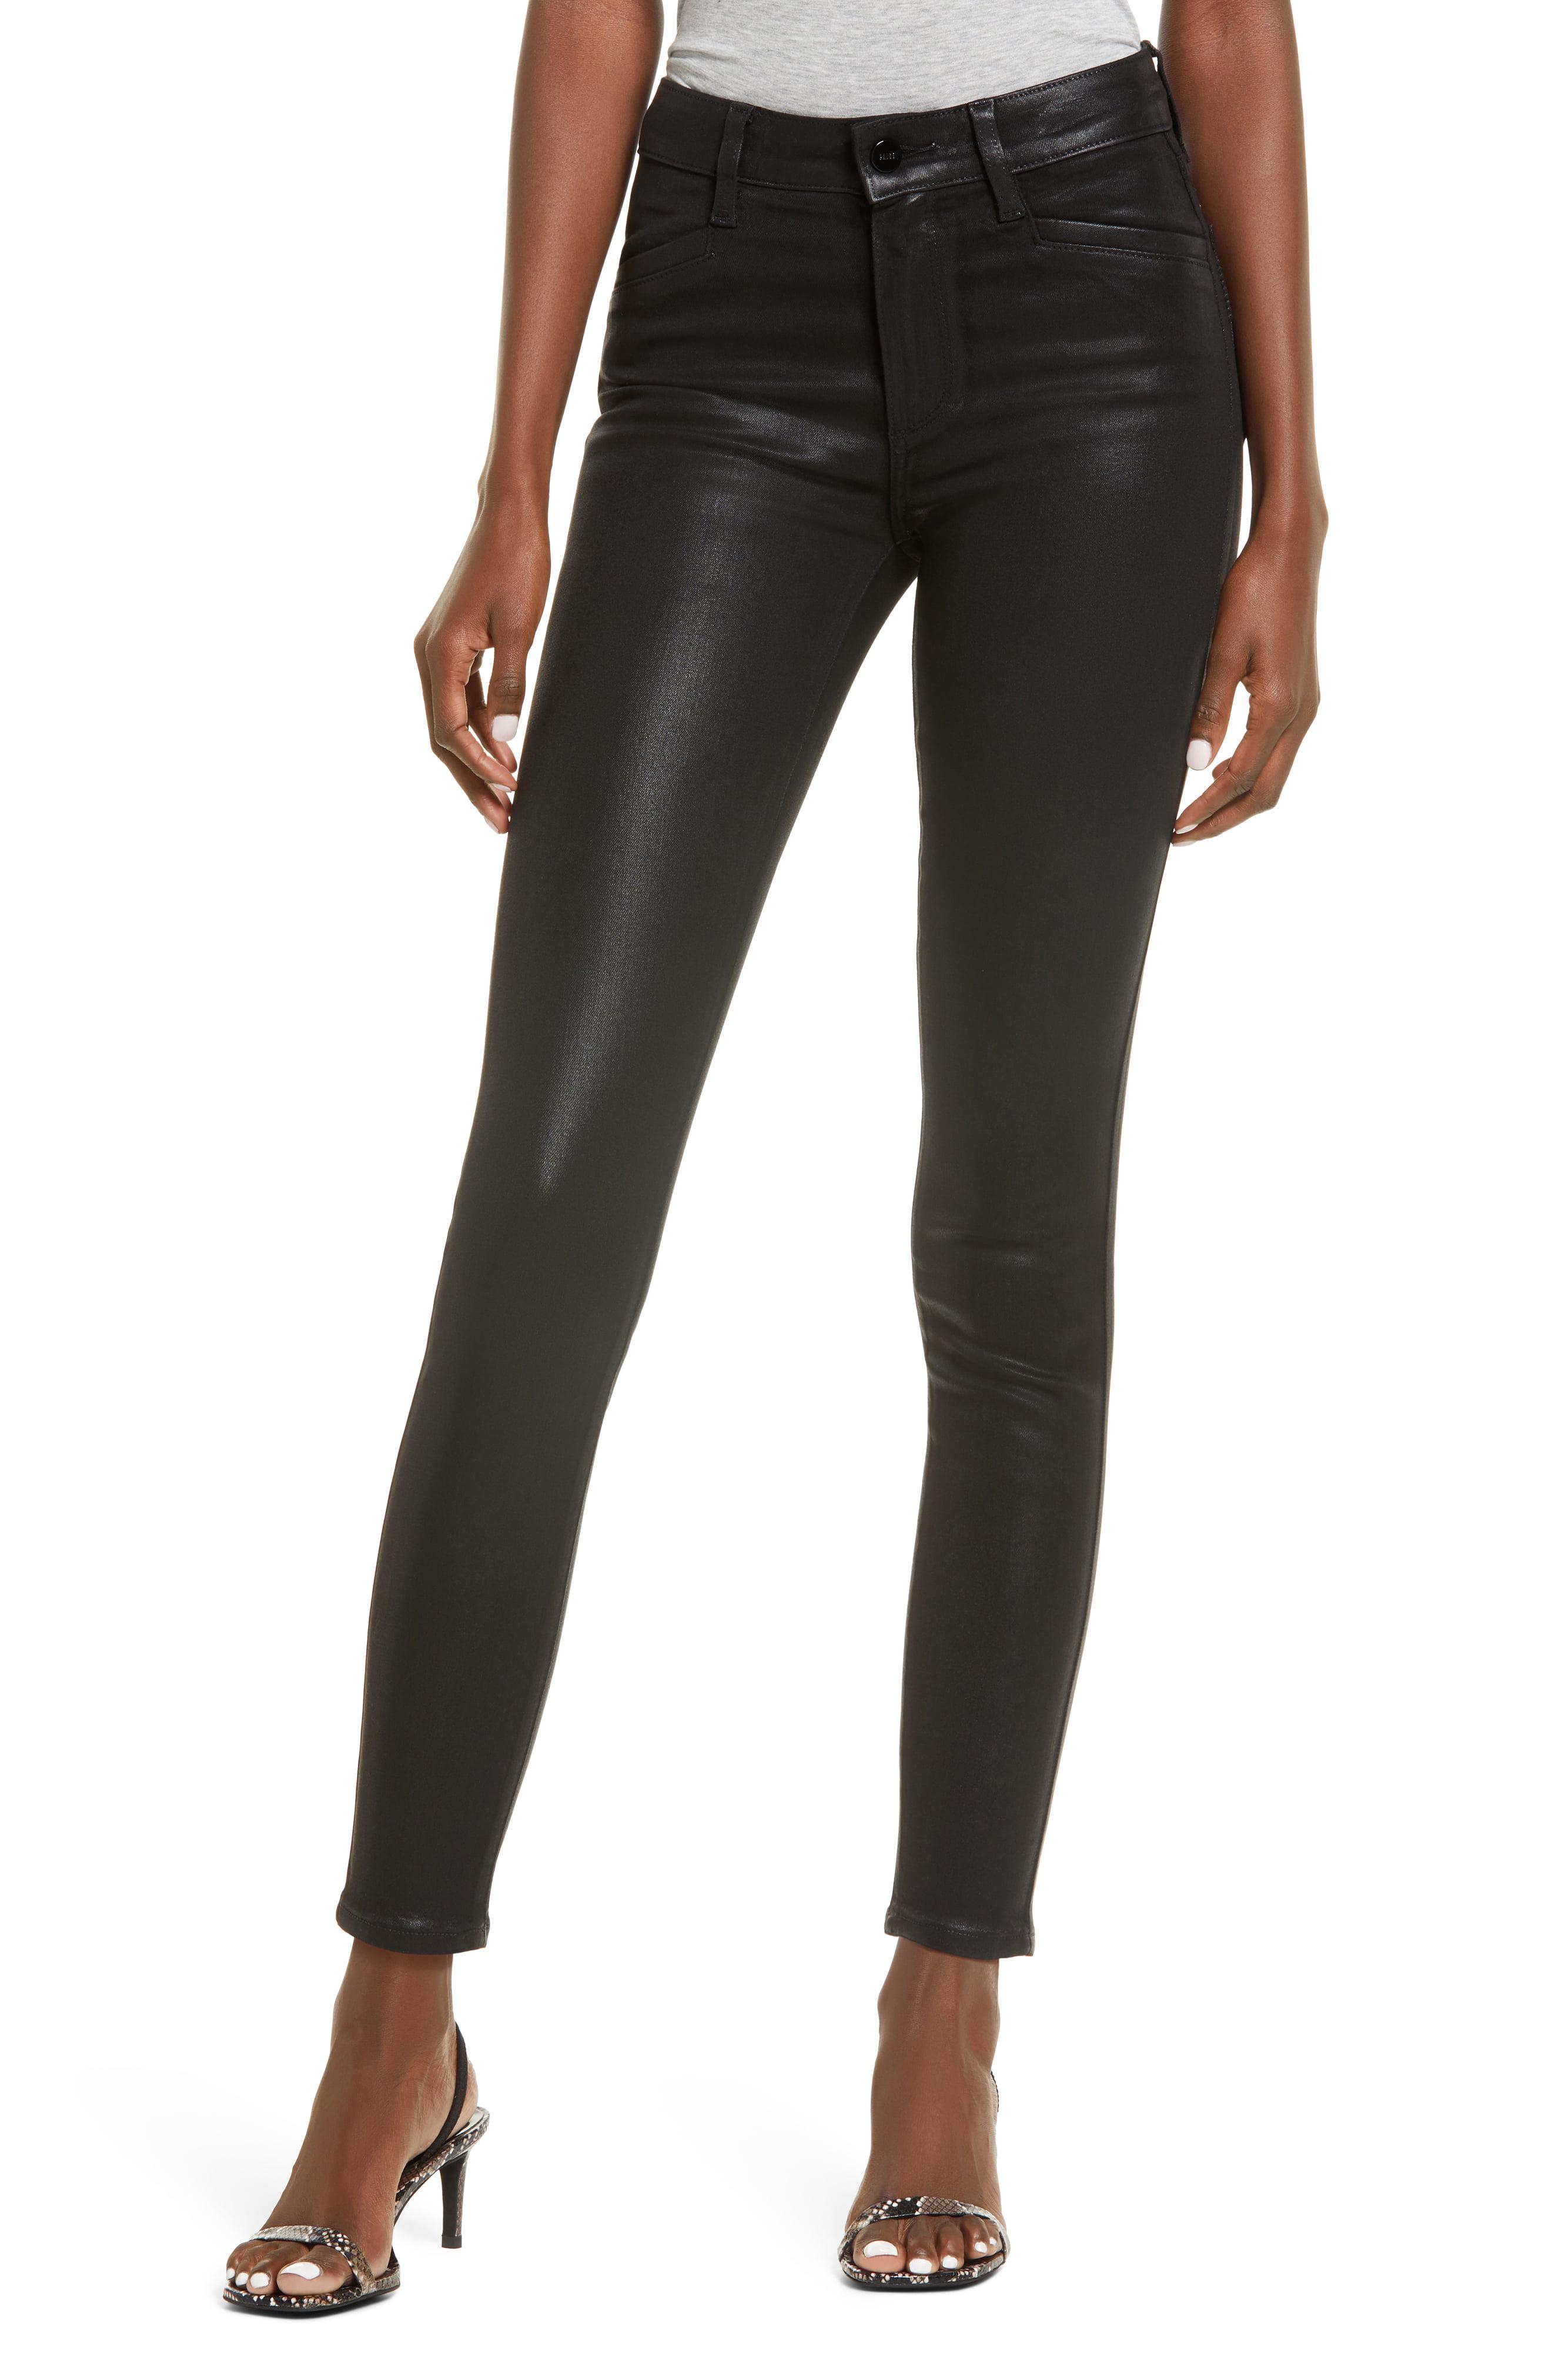 PAIGE Denim Hoxton High Waist Ankle Skinny Jeans in Black - Lyst